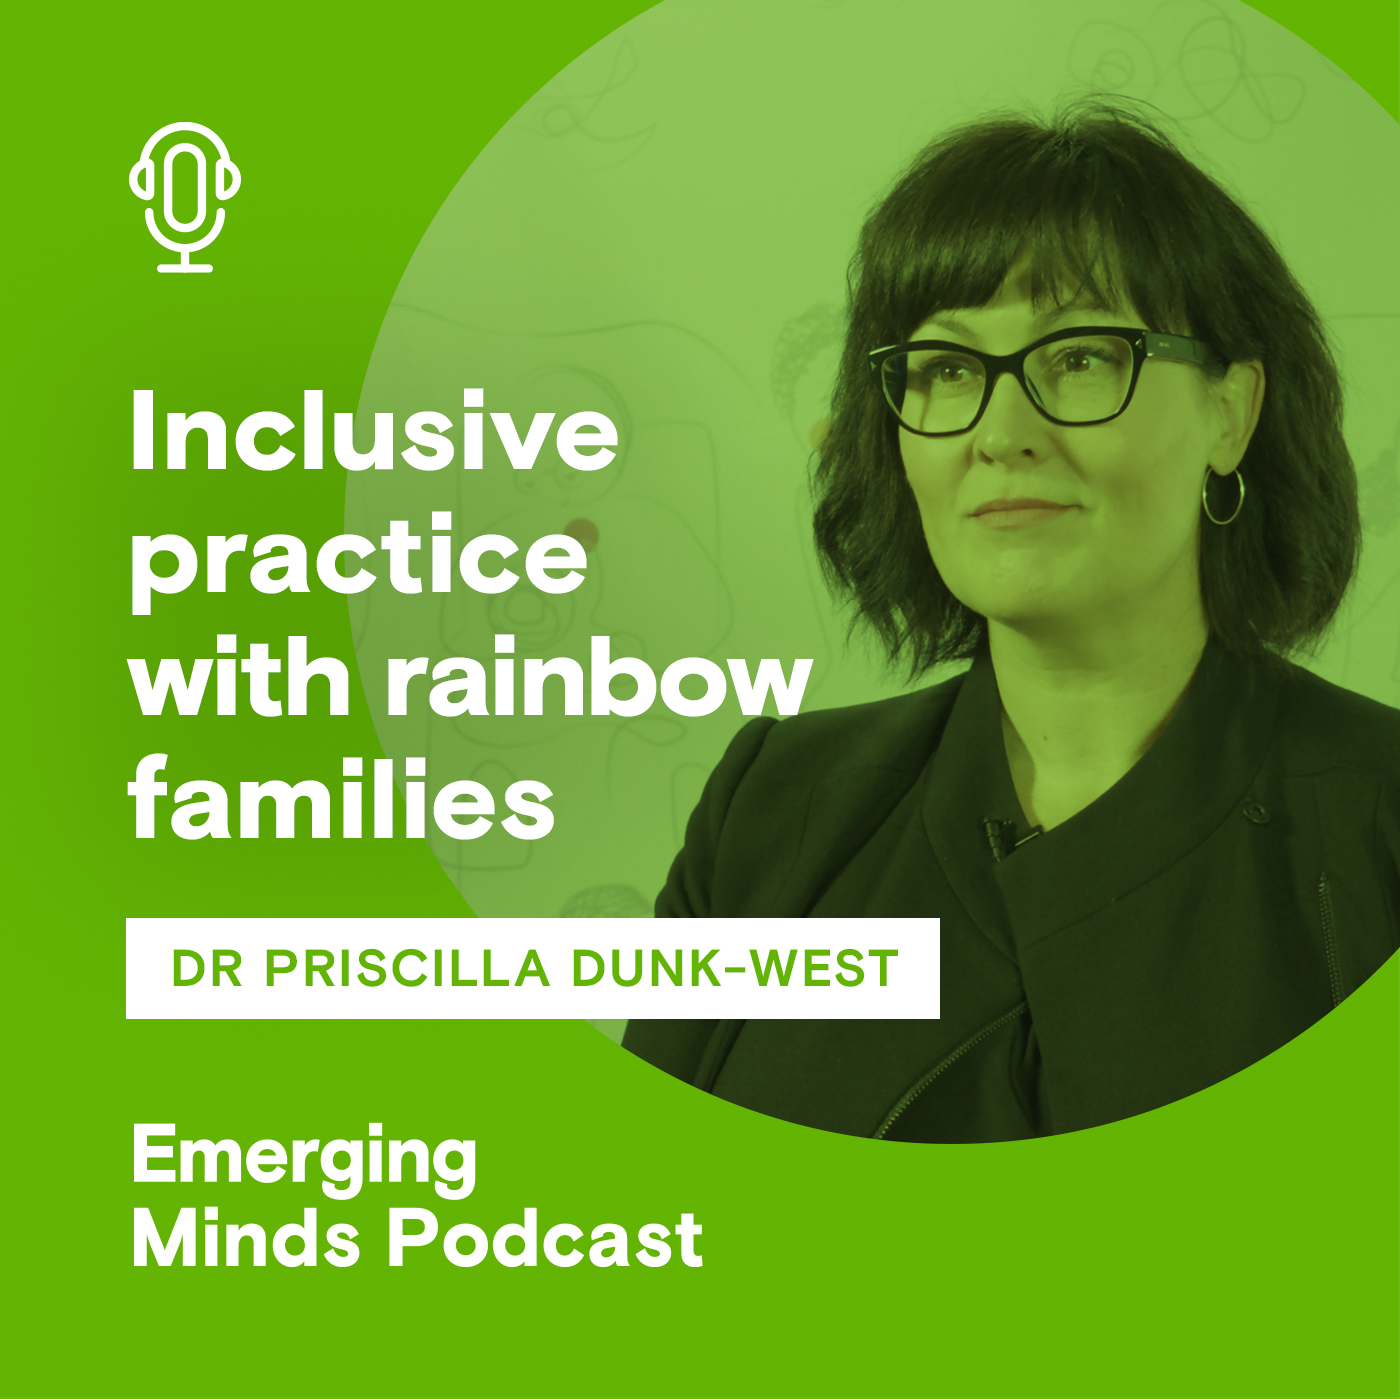 Inclusive practice with rainbow families